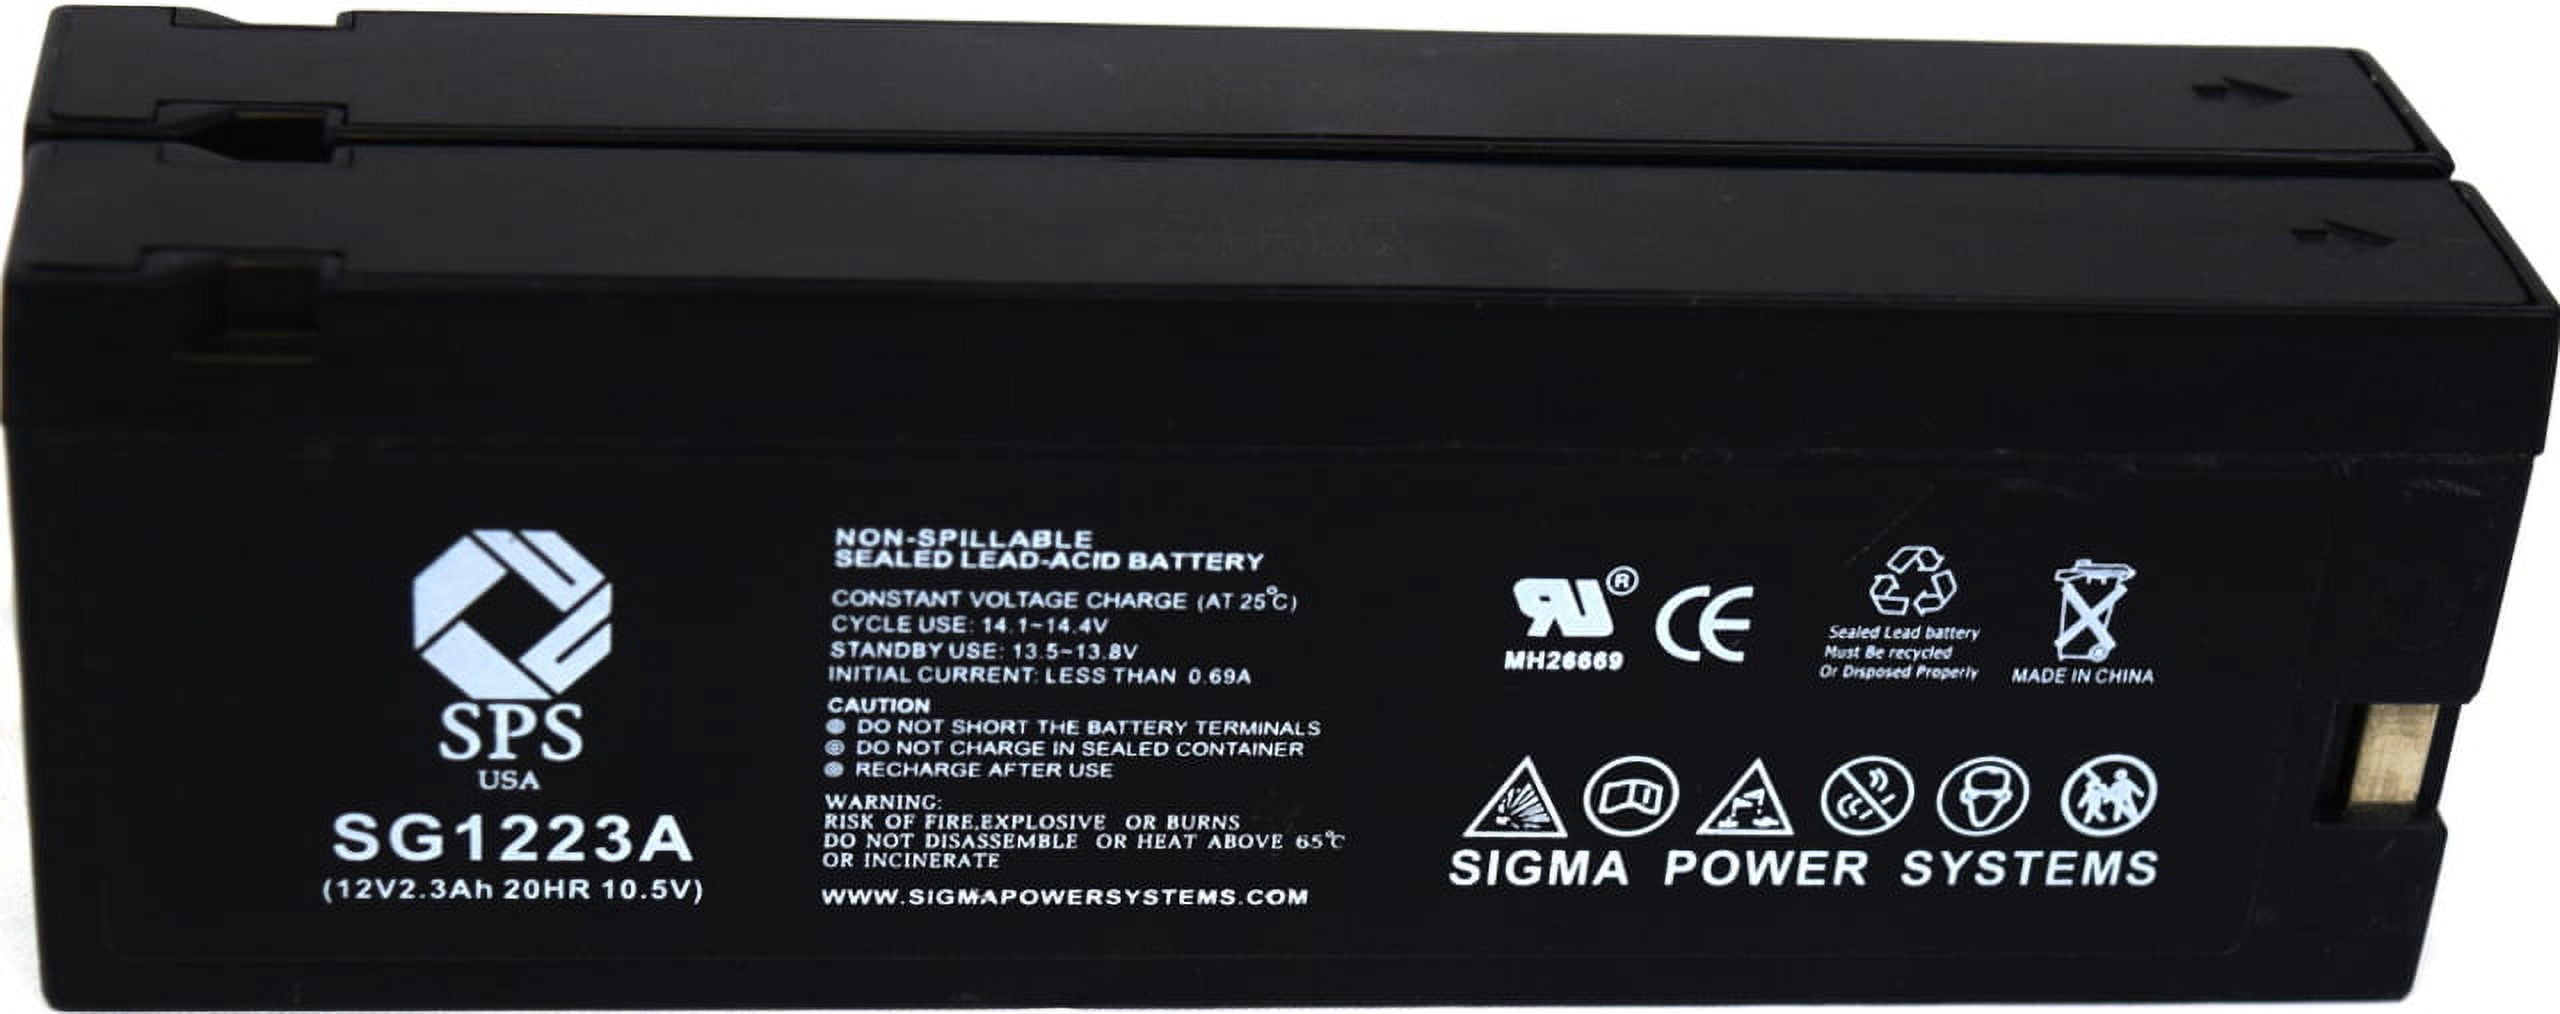 SPS 12V for Brand Sylvania (SG1223A) VC-4526 Pack) Ah A) (Terminal Replacement (2 2.3